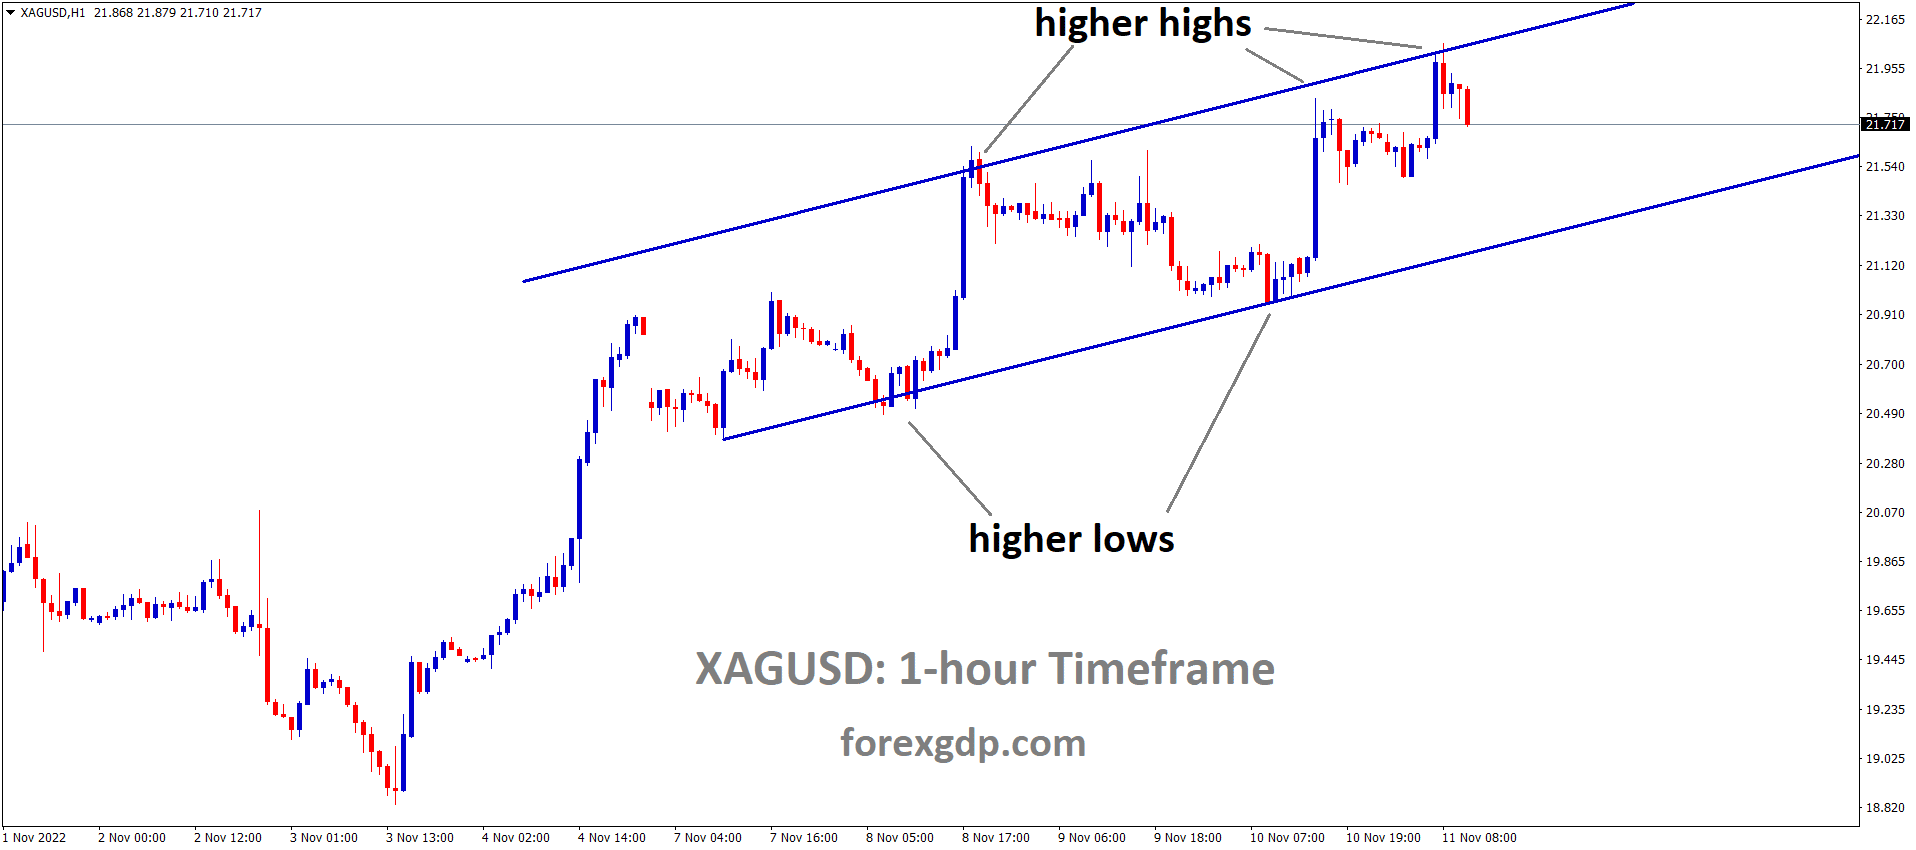 XAGUSD Silver price is moving in an Ascending channel and the market has fallen from the higher high area of the channel 1